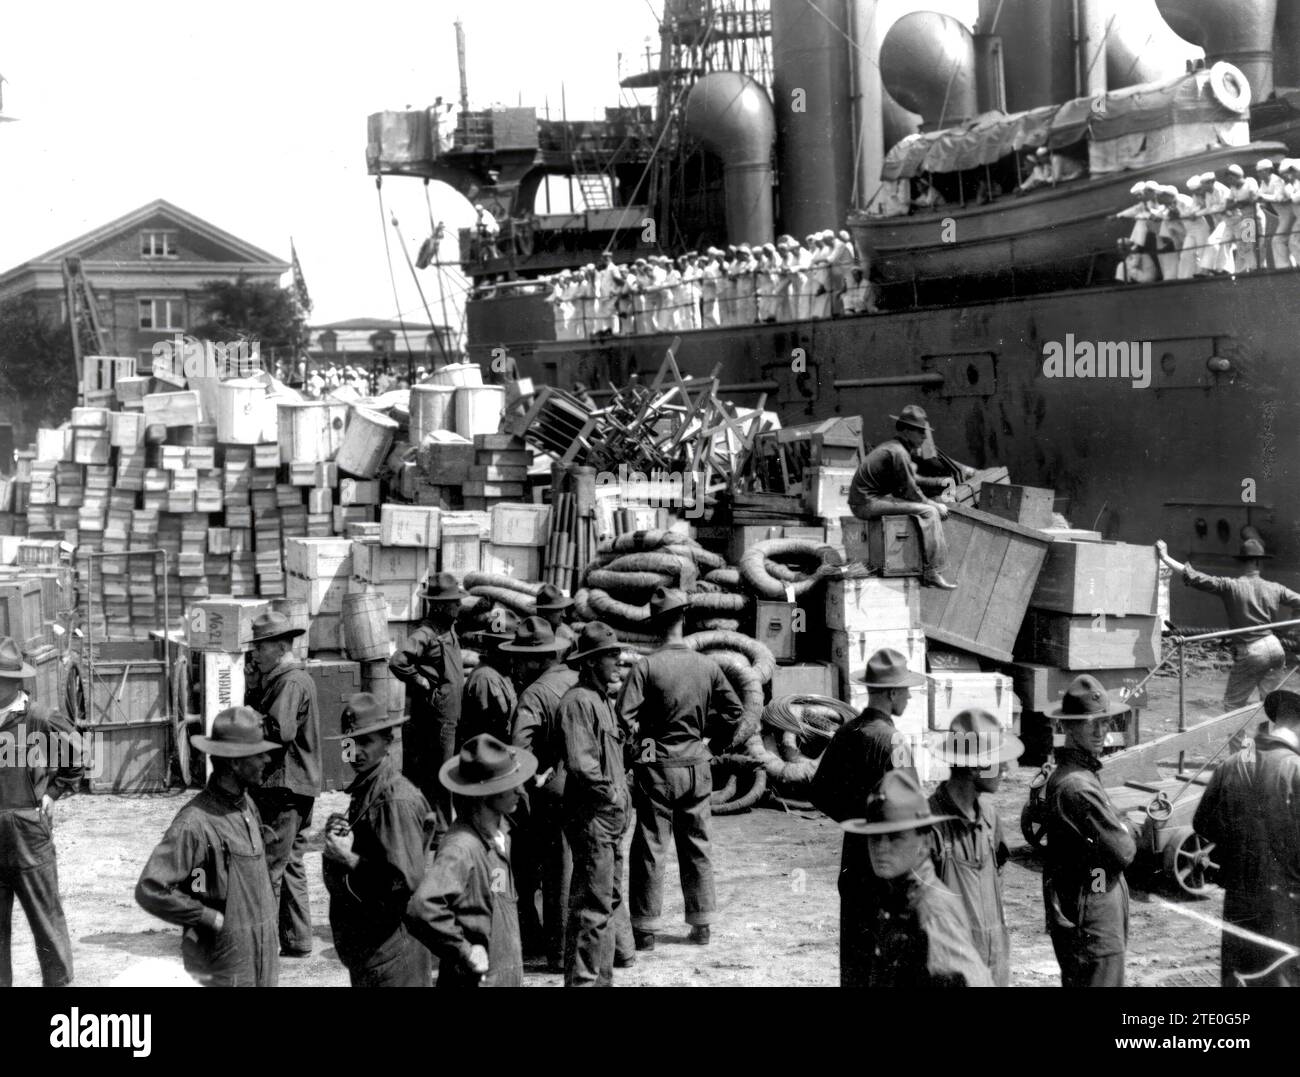 07/31/1915. The United States and Mexico. Shipment of Weapons and Ammunition Aboard the Yankee battleship 'Tennesee' before its departure for Haiti, from where it was prepared to move to Mexico if necessary. Credit: Album / Archivo ABC / Louis Hugelmann Stock Photo